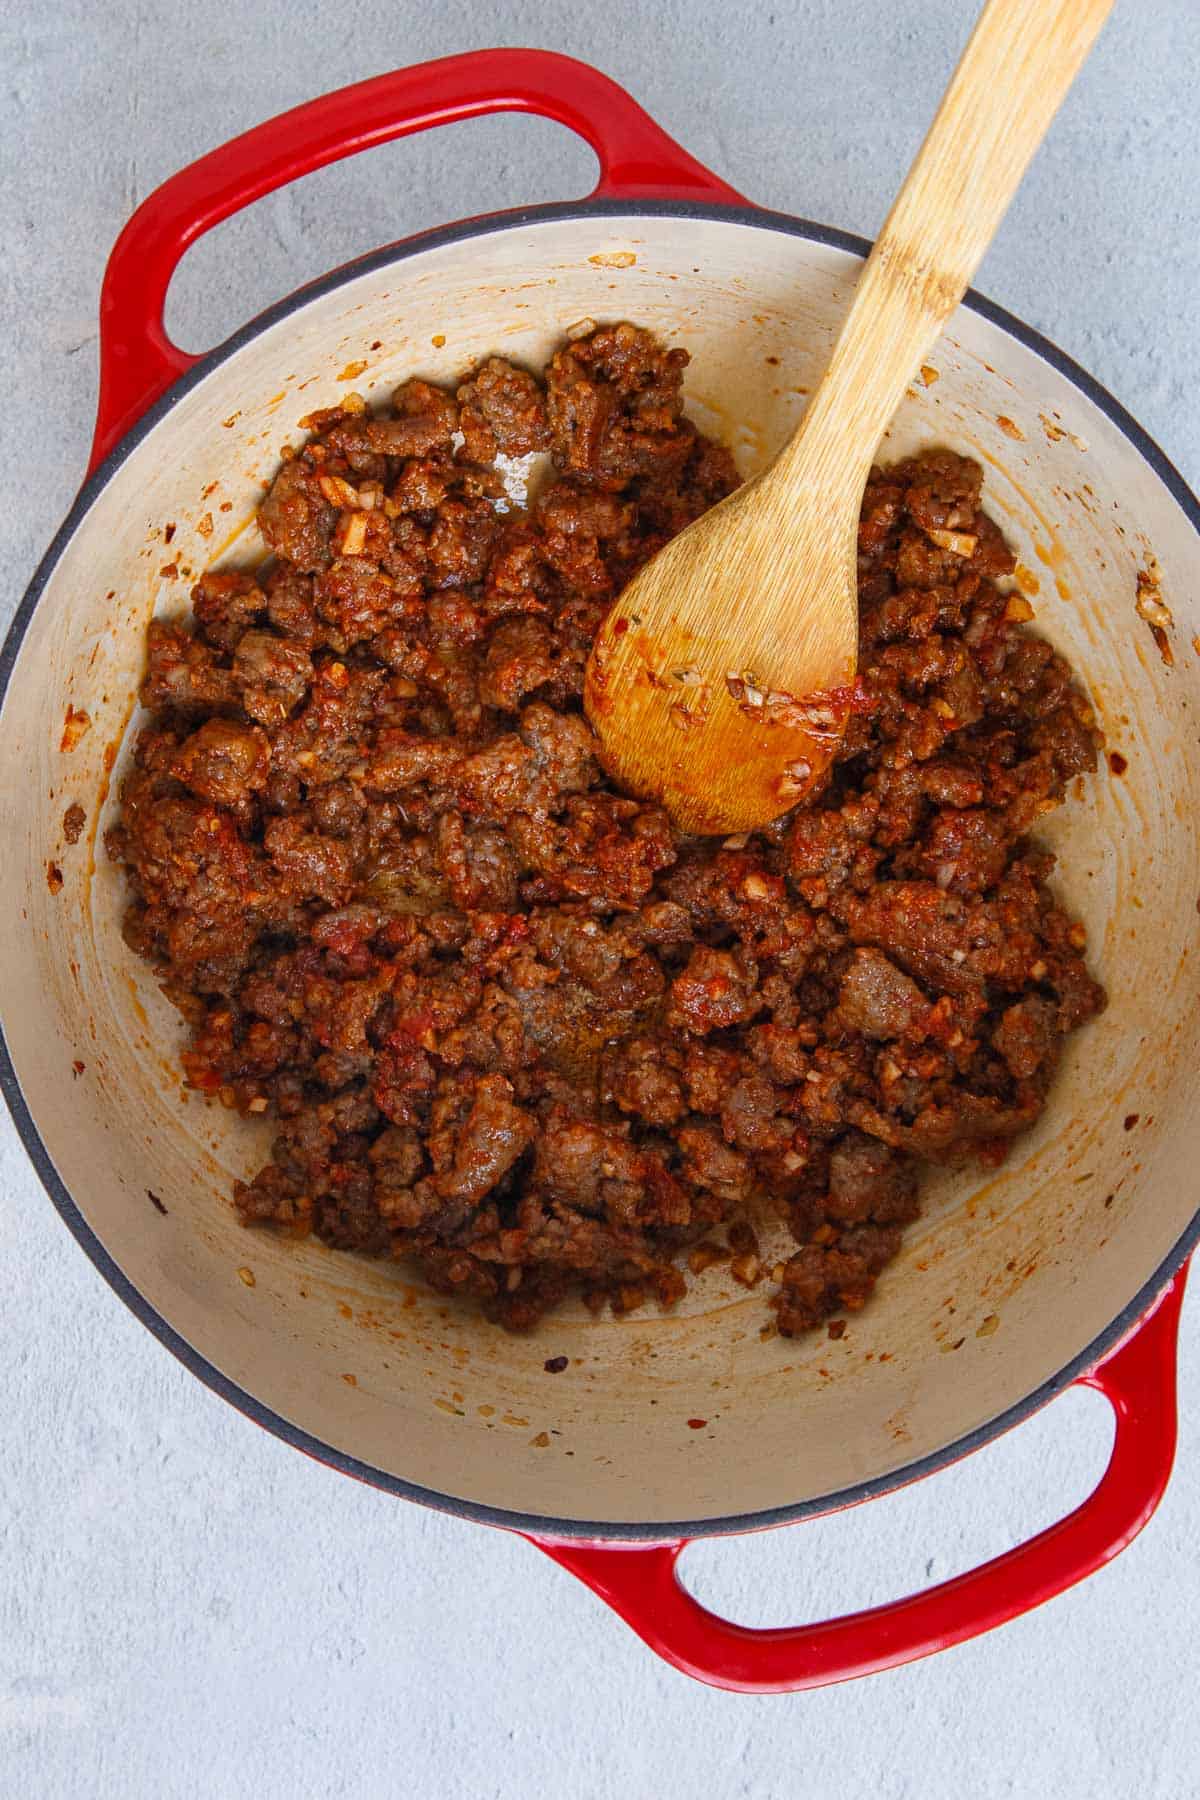 Tomato paste mixed in with cooked Italian sausage